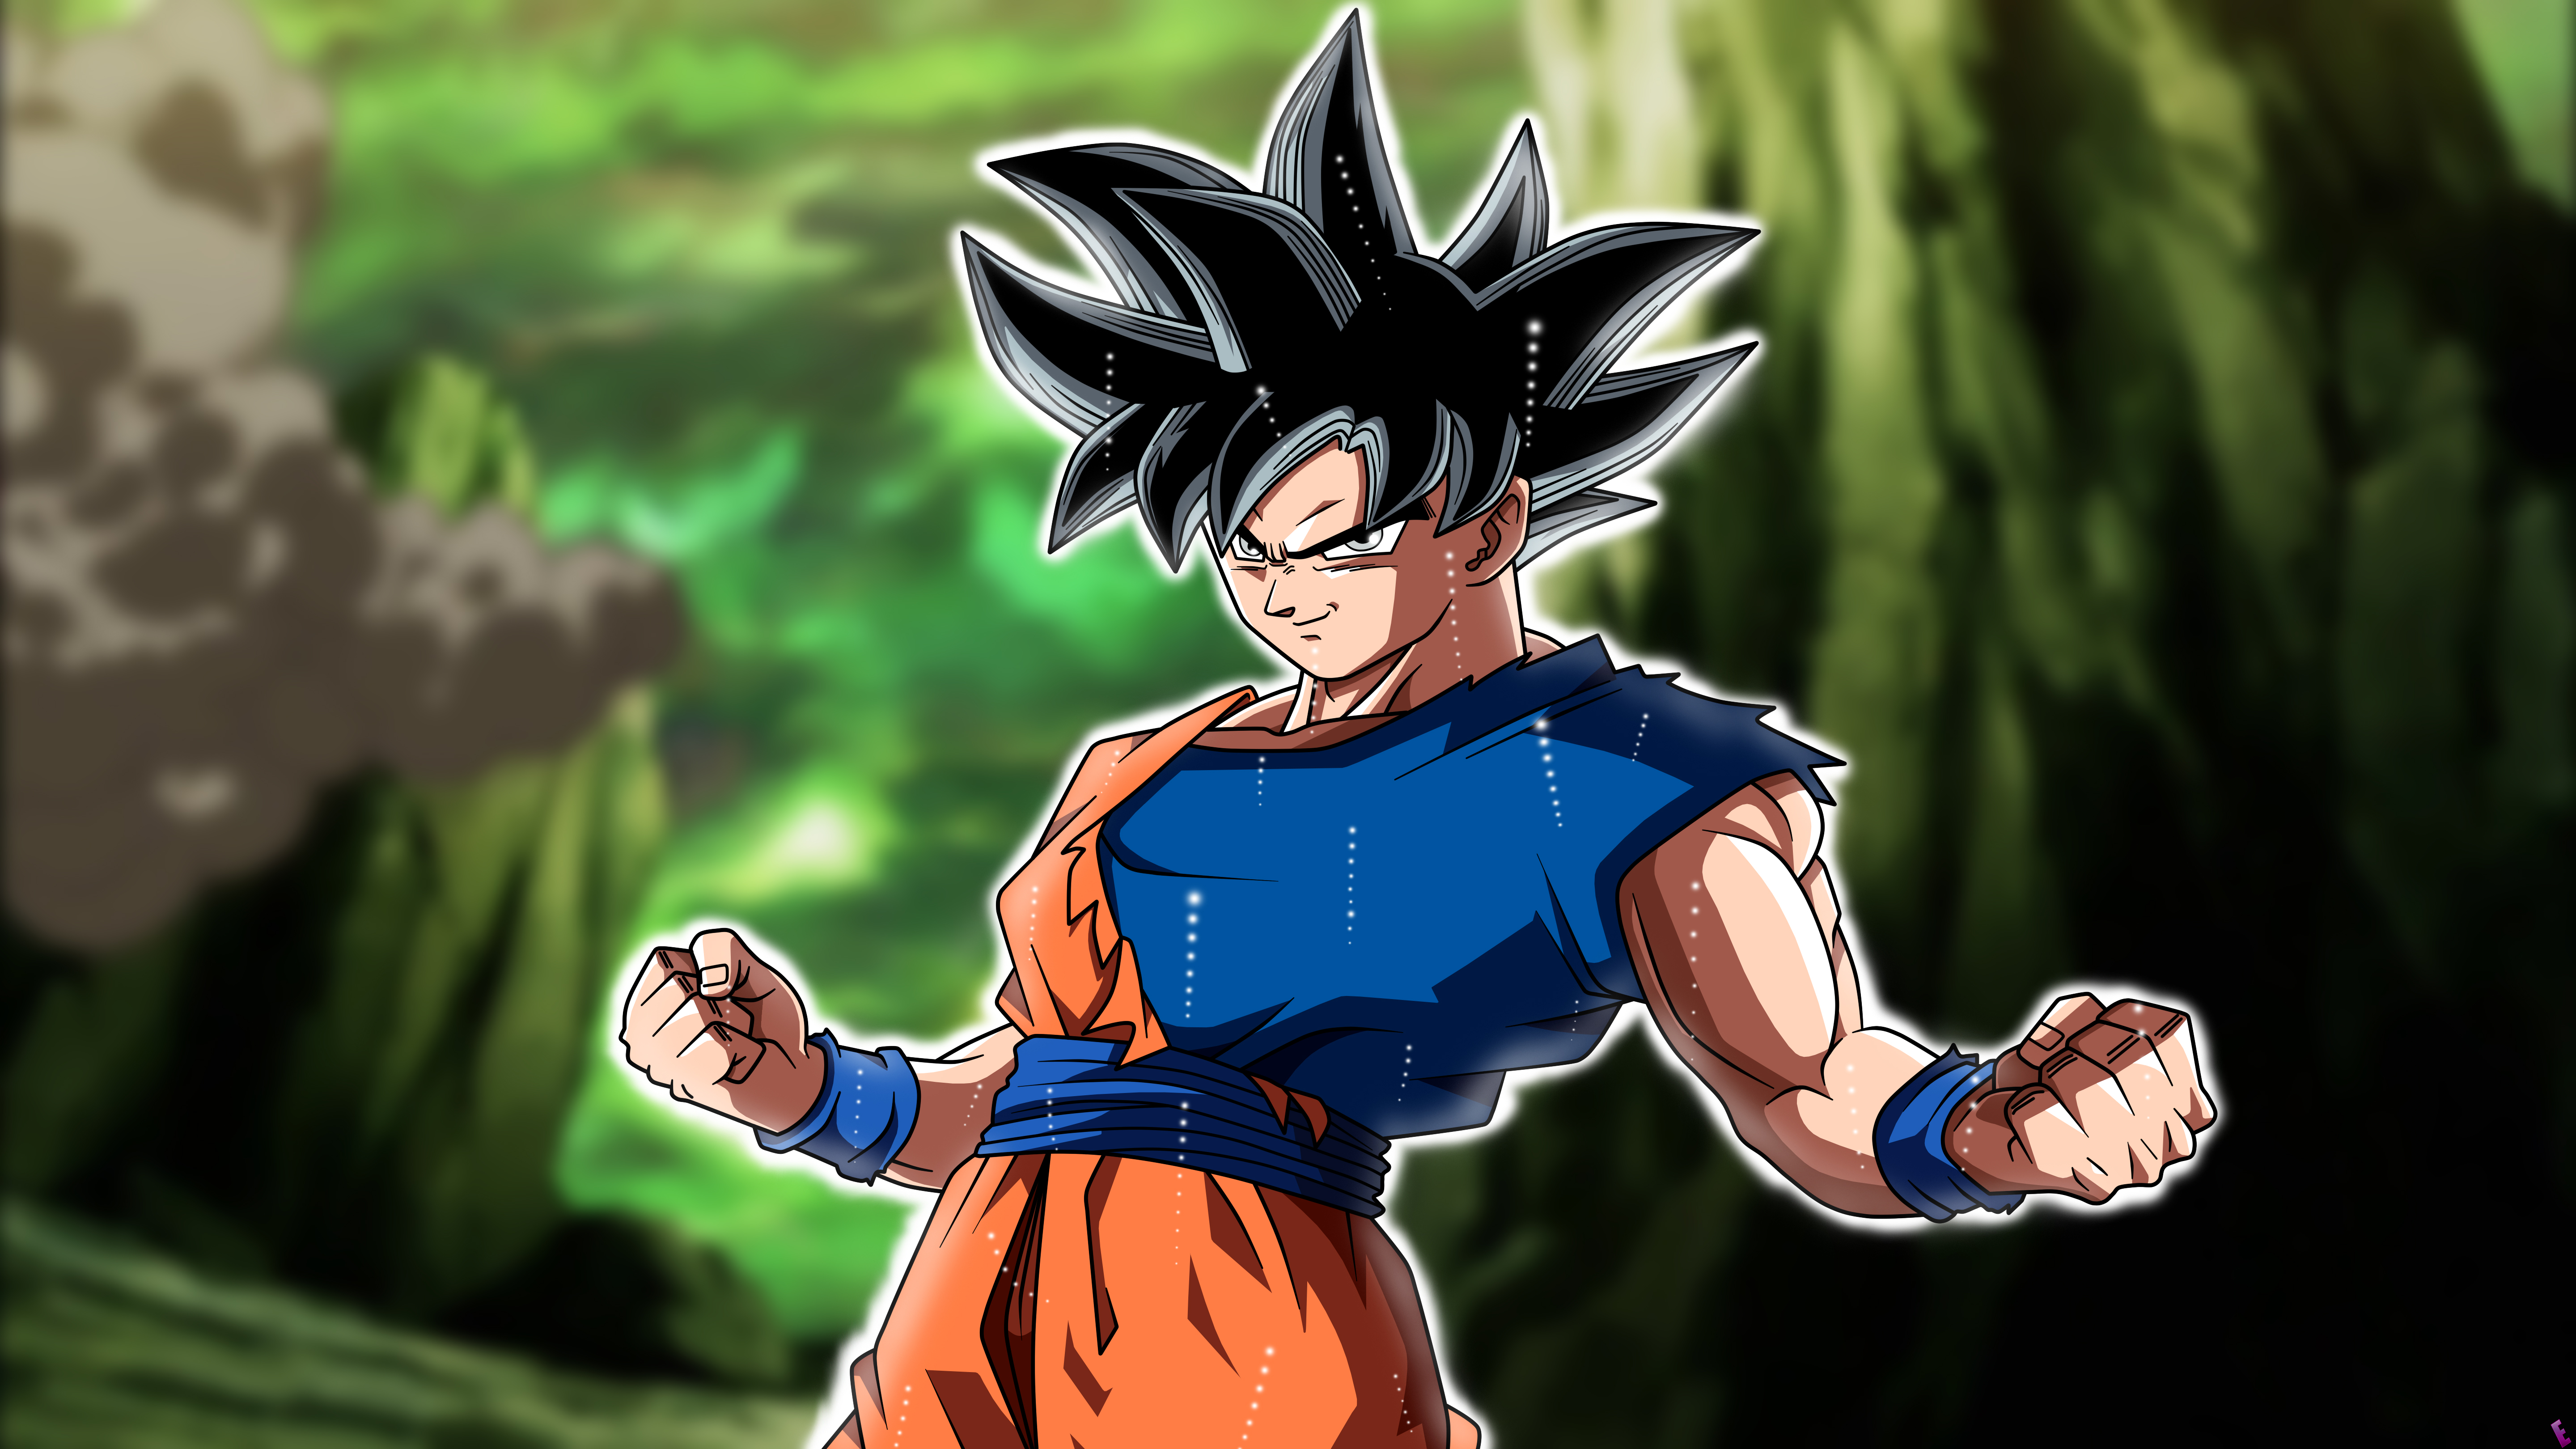 Goku Dragon Ball Super 5k 2018, HD Anime, 4k Wallpapers, Images, Backgrounds, Photos and Pictures